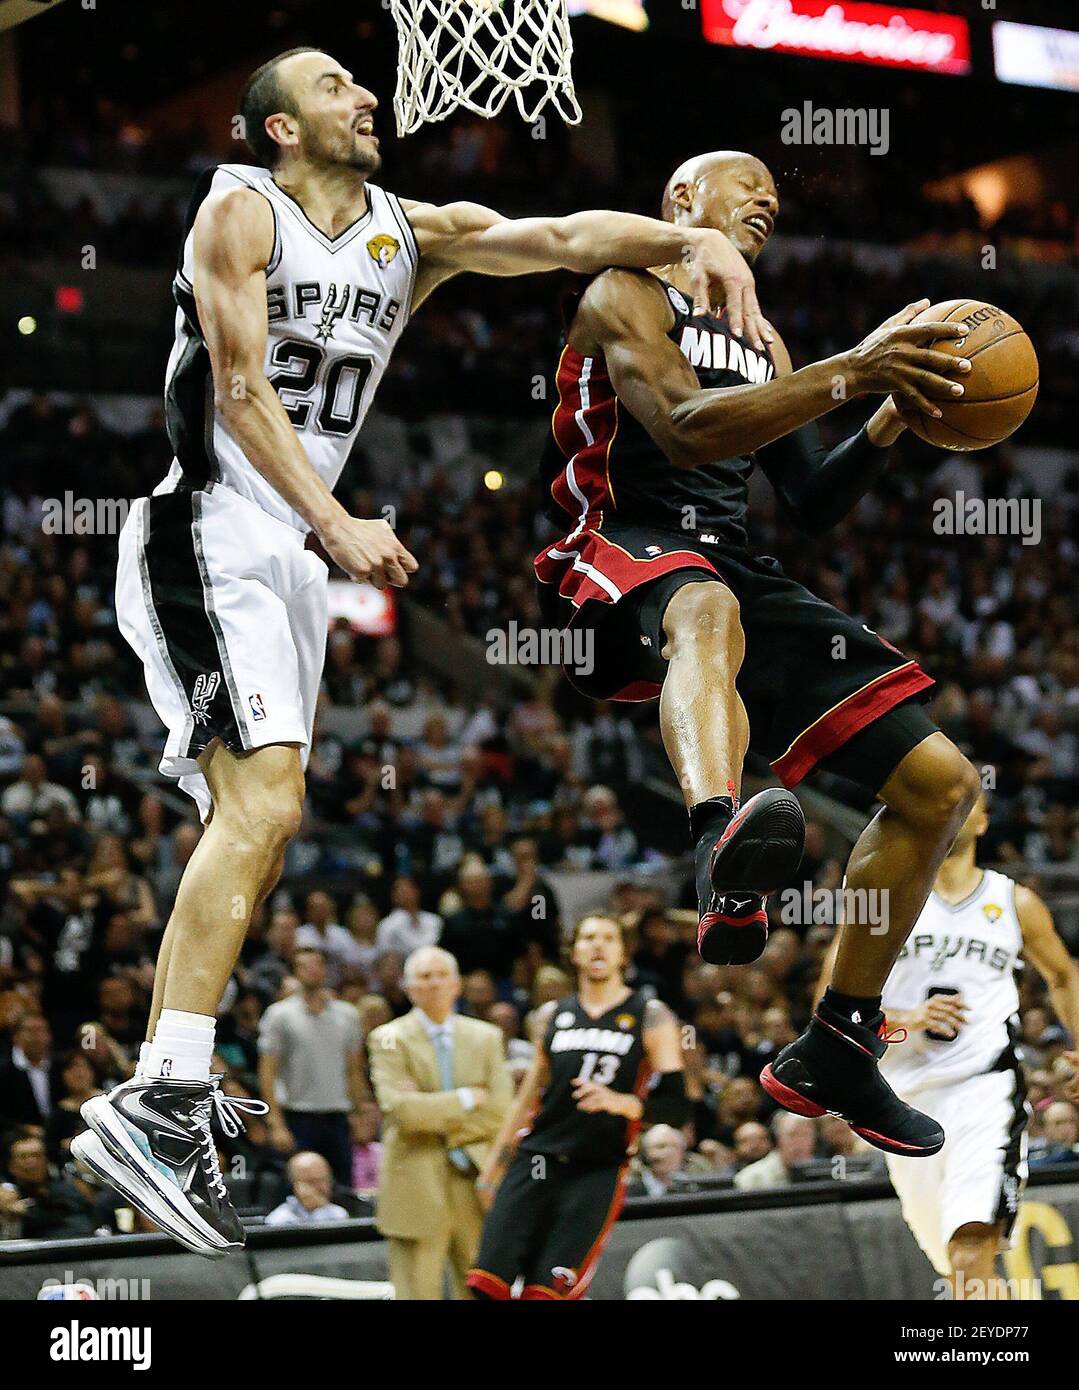 San Antonio Spurs' Manu Ginobili, left, fouls Miami Heat's Ray Allen as he goes to the basket during the fourth quarter in Game 5 of the NBA Finals at the AT&T Center in San Antonio, Texas, Sunday, June 16, 2013. (Photo by Al Diaz/Miami Herald/MCT/Sipa USA) Stock Photo